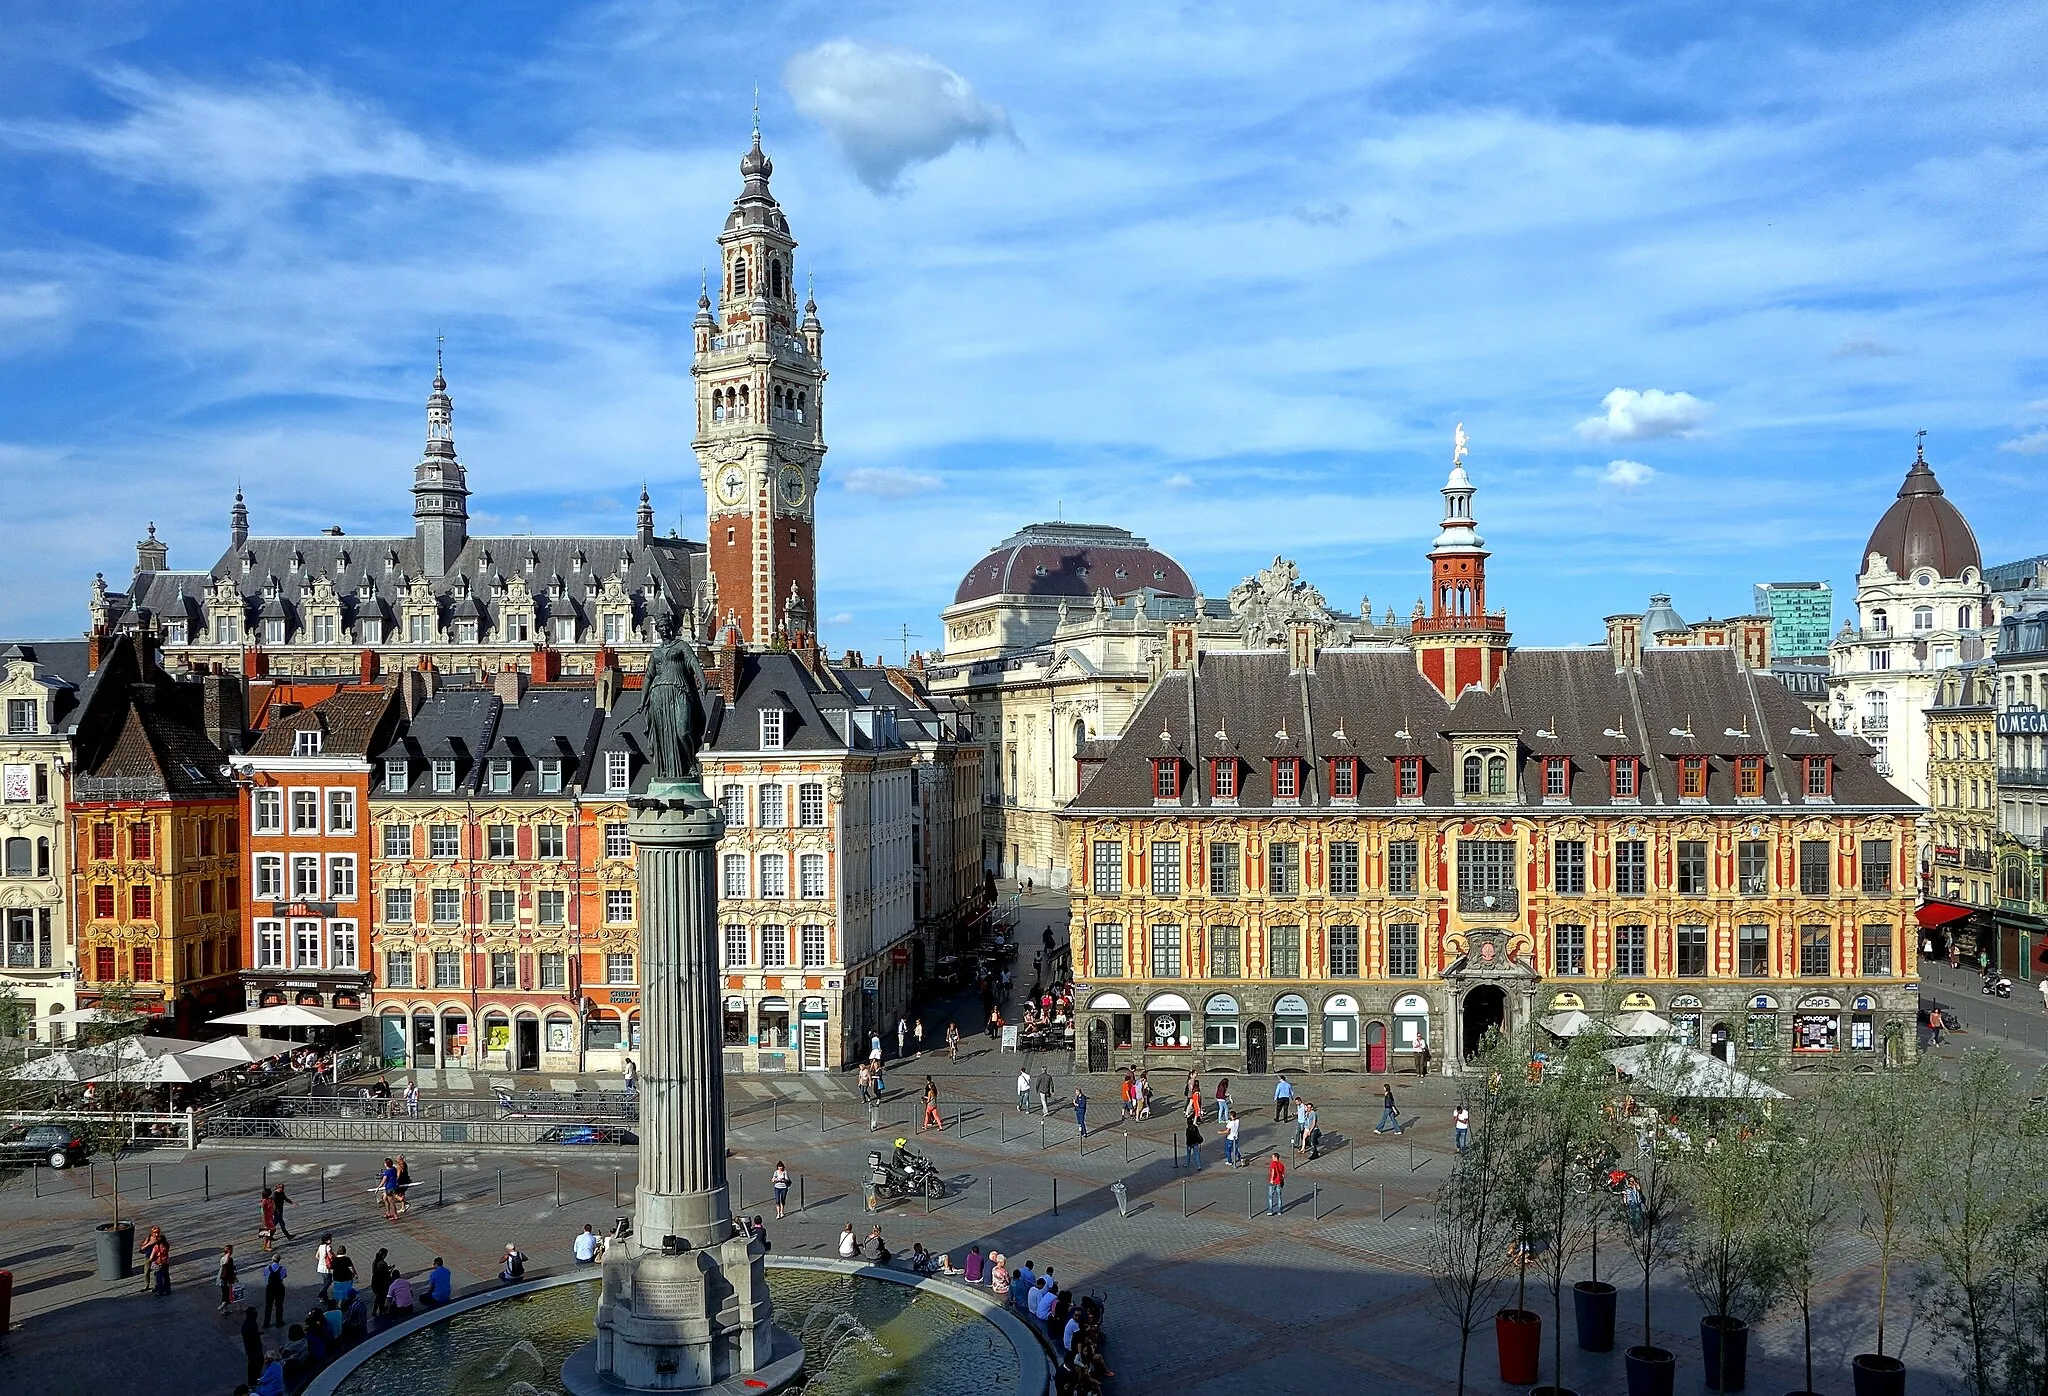 Photo showing: Place du Général de Gaulle, the central square of in Lille, northeastern France. Behind the Column of the Goddess is the bell tower of the Chamber of Commerce. The large building to the right (on the square) is the Vieille Bourse (Old Stock Market).